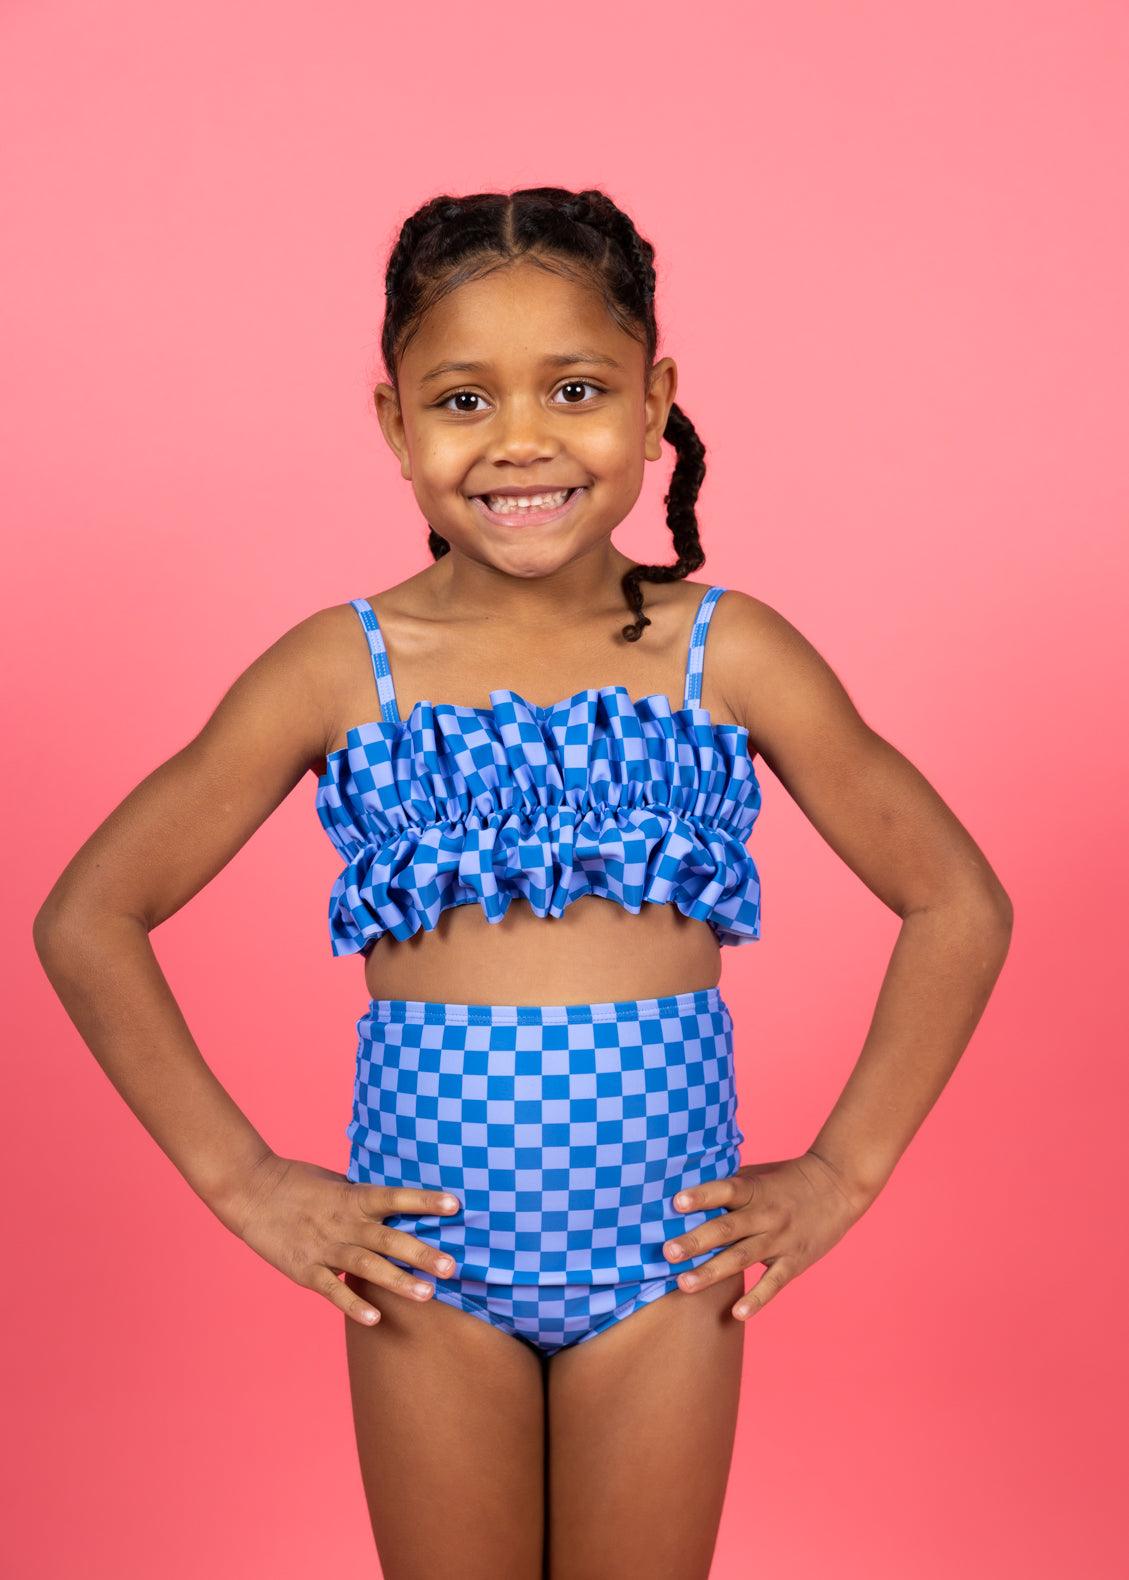 High-Waisted + Crop Top Kids Swimsuits Kortni Jeane Just $14.99! (Reg.  $25.00) Plus, FREE Shipping! - Common Sense With Money